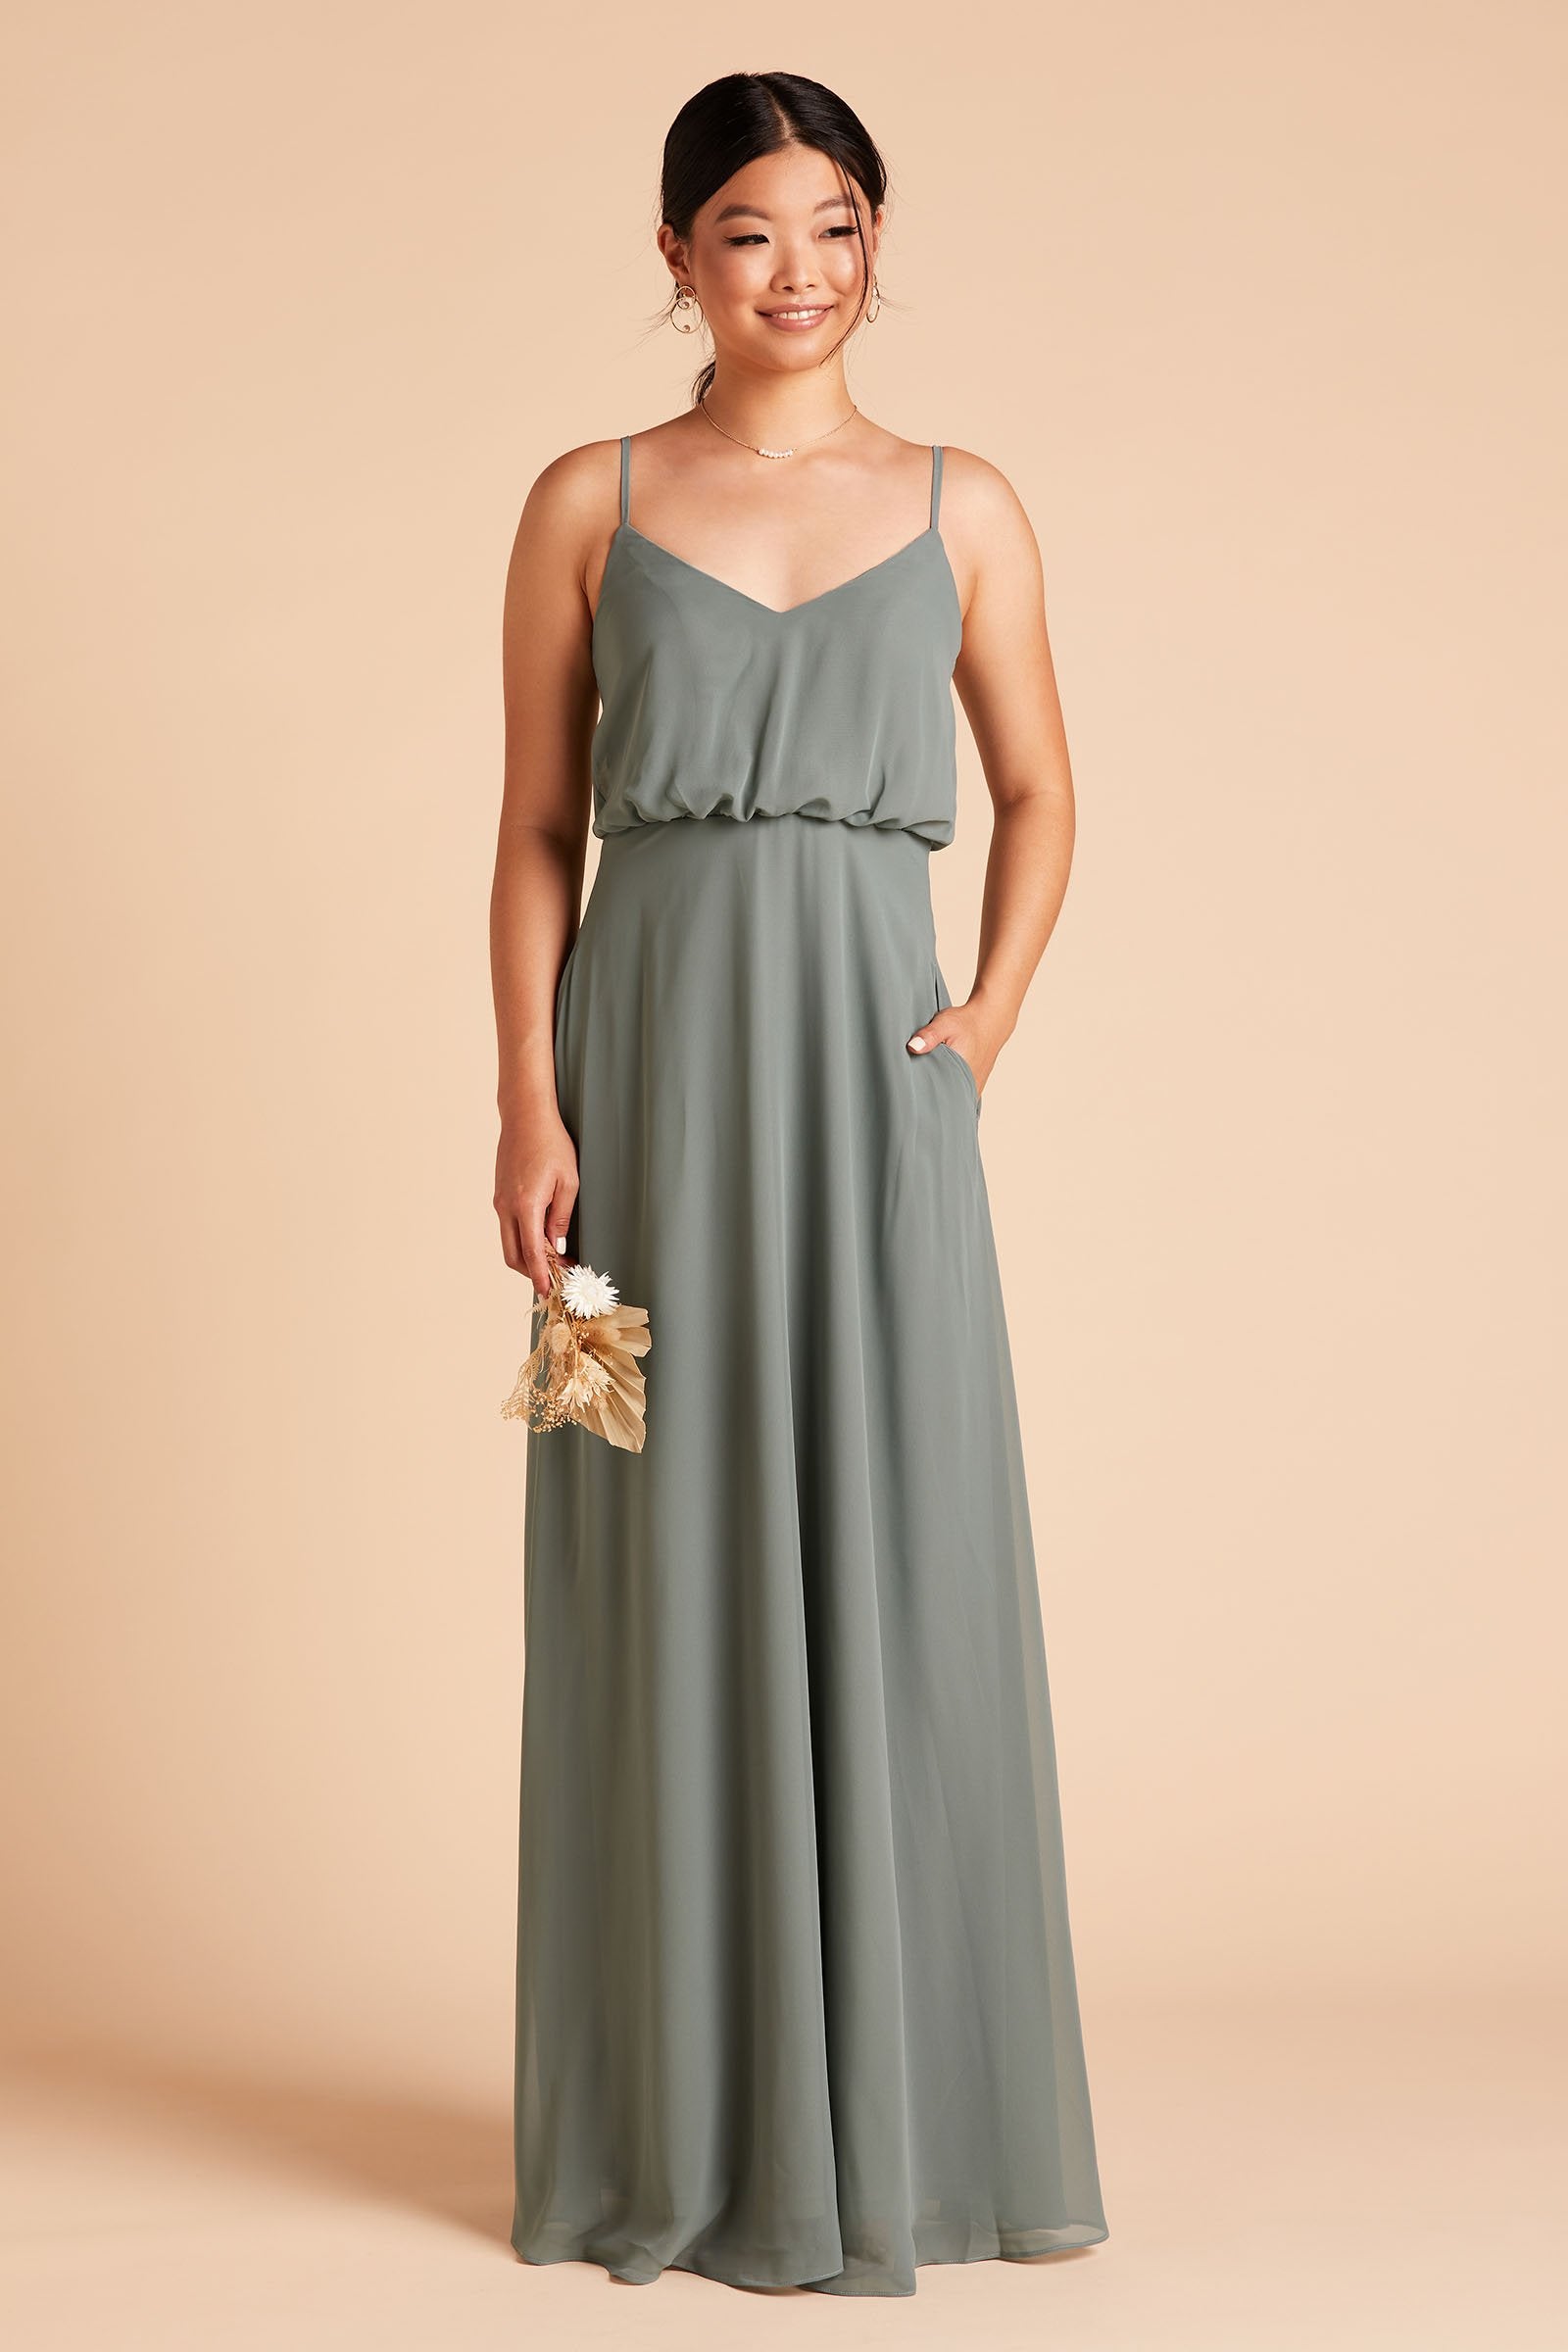 Gwennie bridesmaid dress in sea glass green chiffon by Birdy Grey, front view with hand in pocket